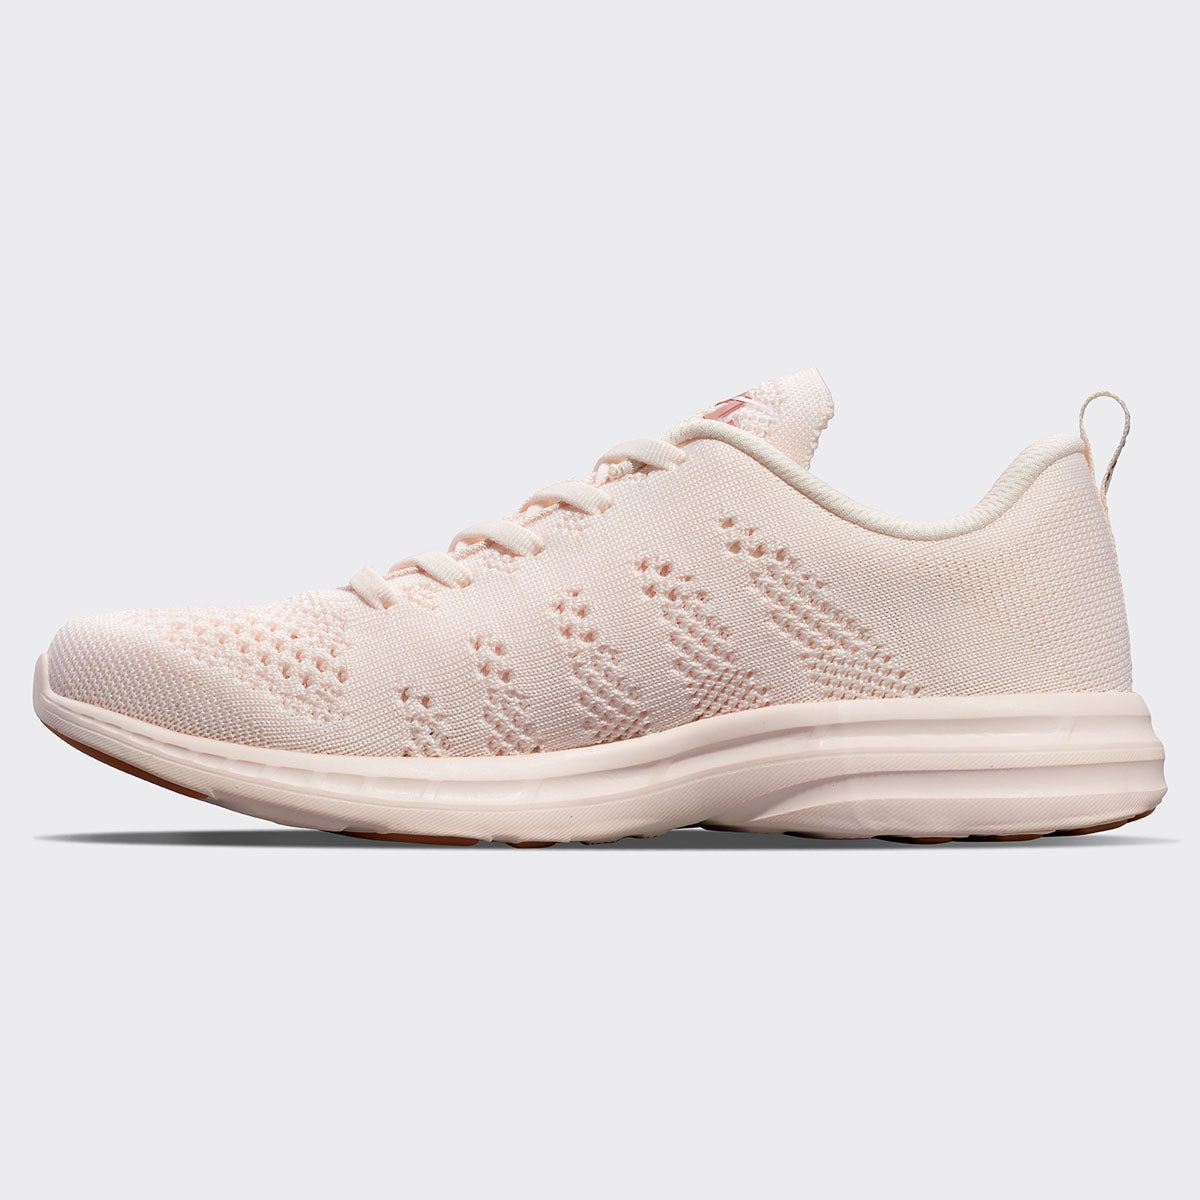 Details 110+ gym sneakers womens